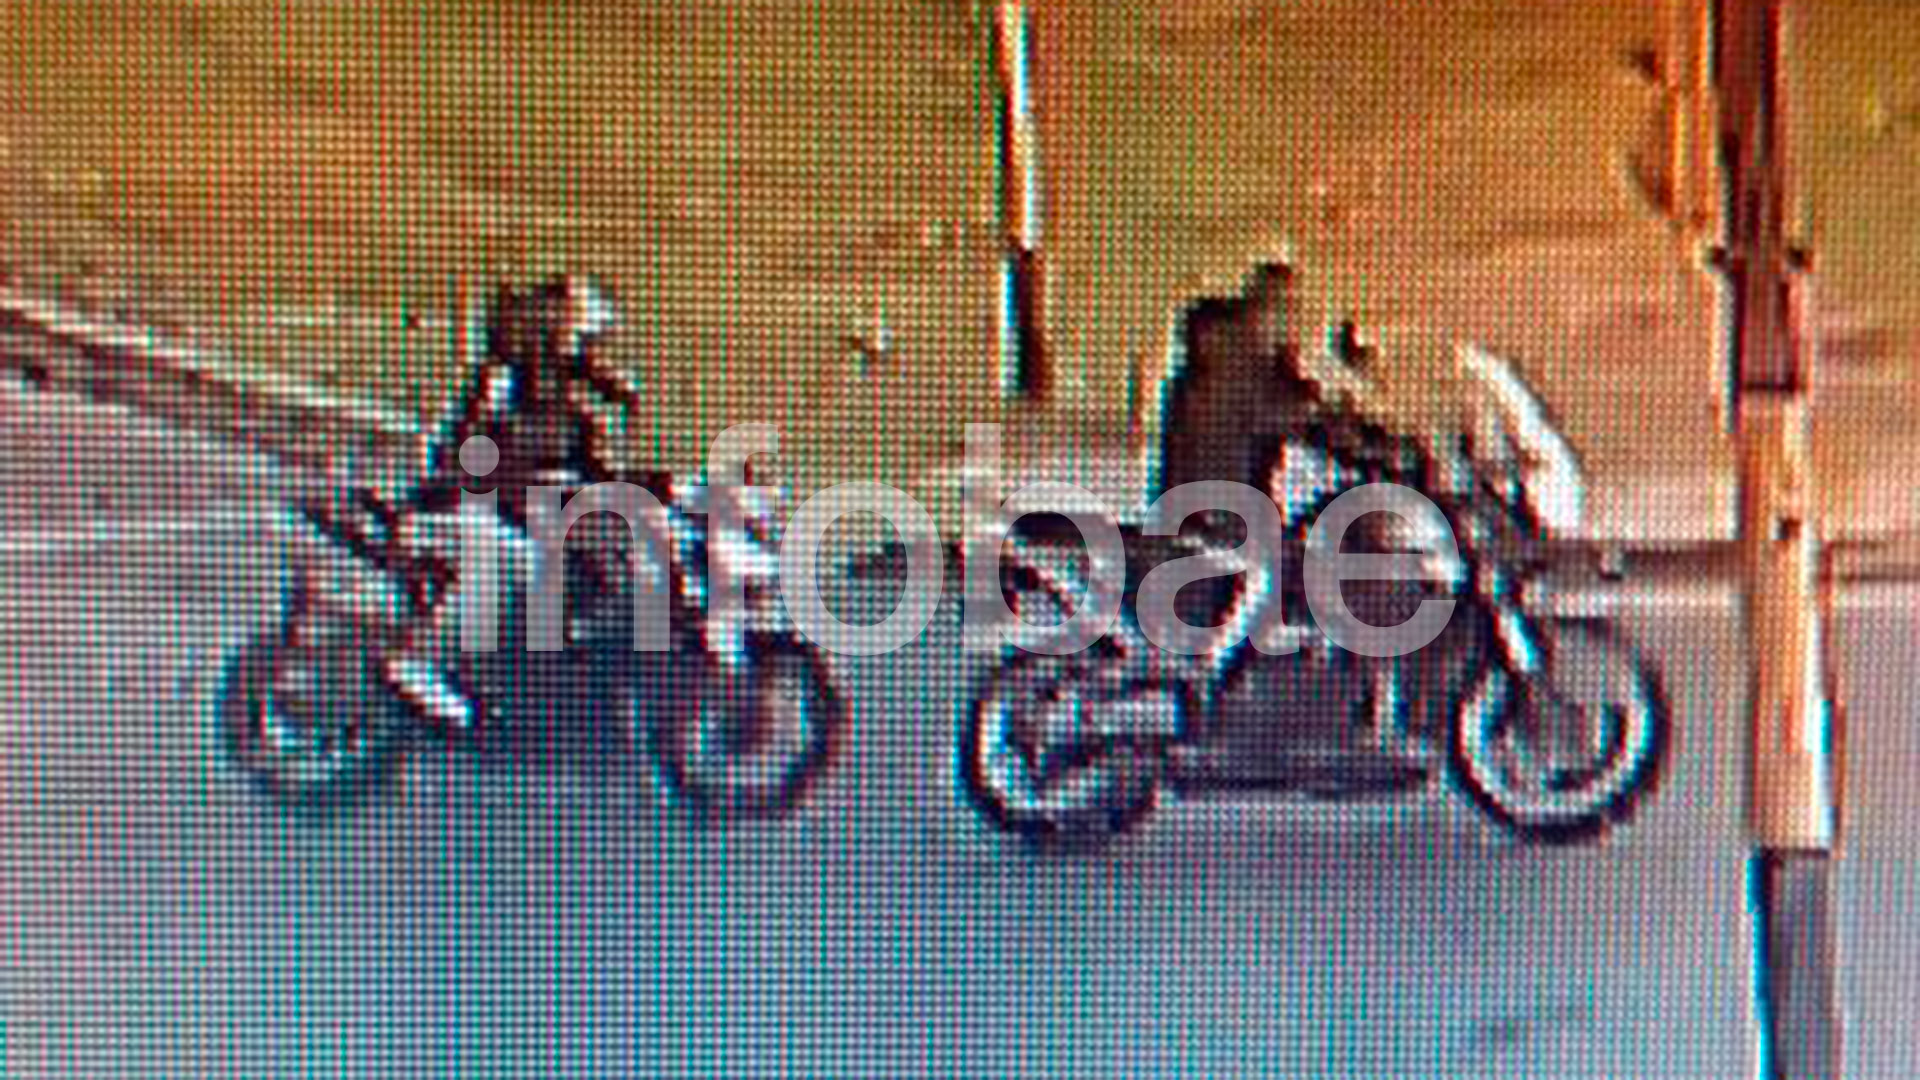 The criminals who stole Blaquier's motorcycle and shot him dead, filmed by security cameras